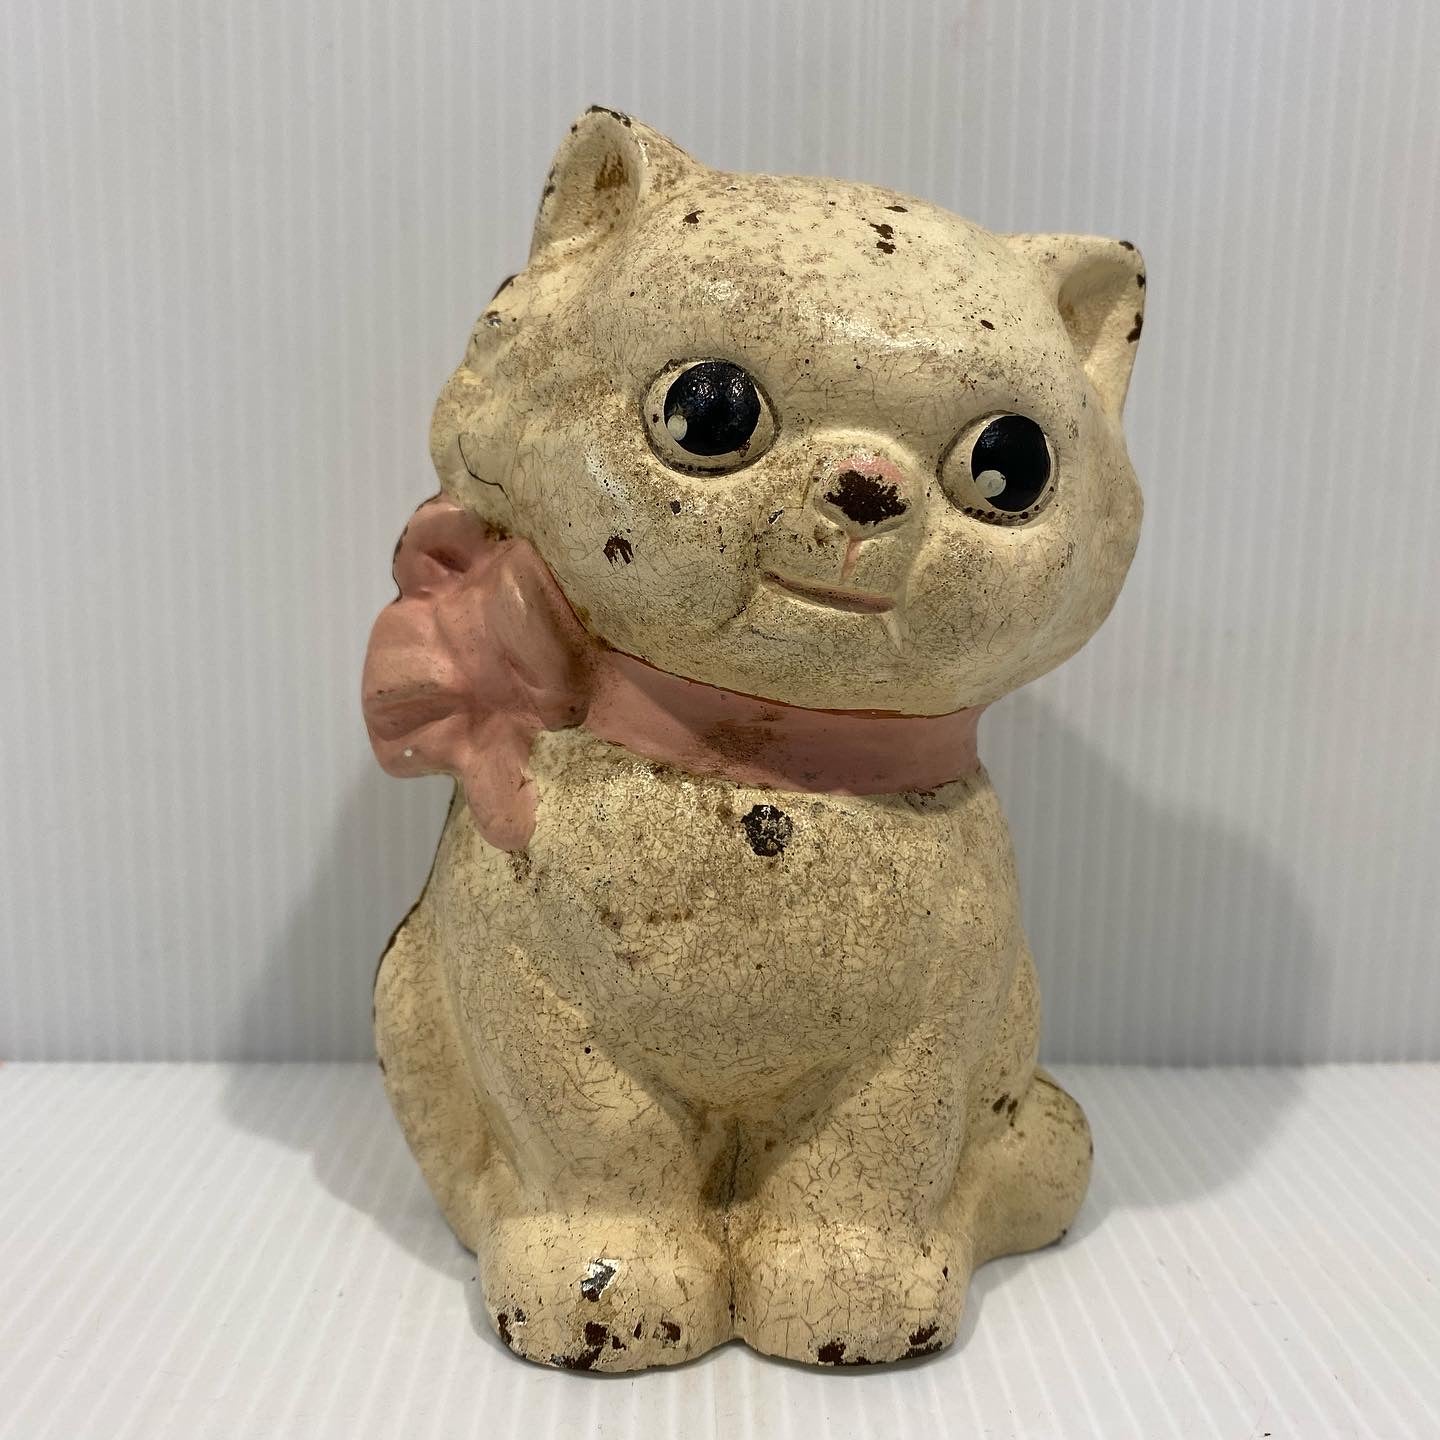 Antique, original, Cast Iron "KITTY BANK" made by Hubley. 1920s